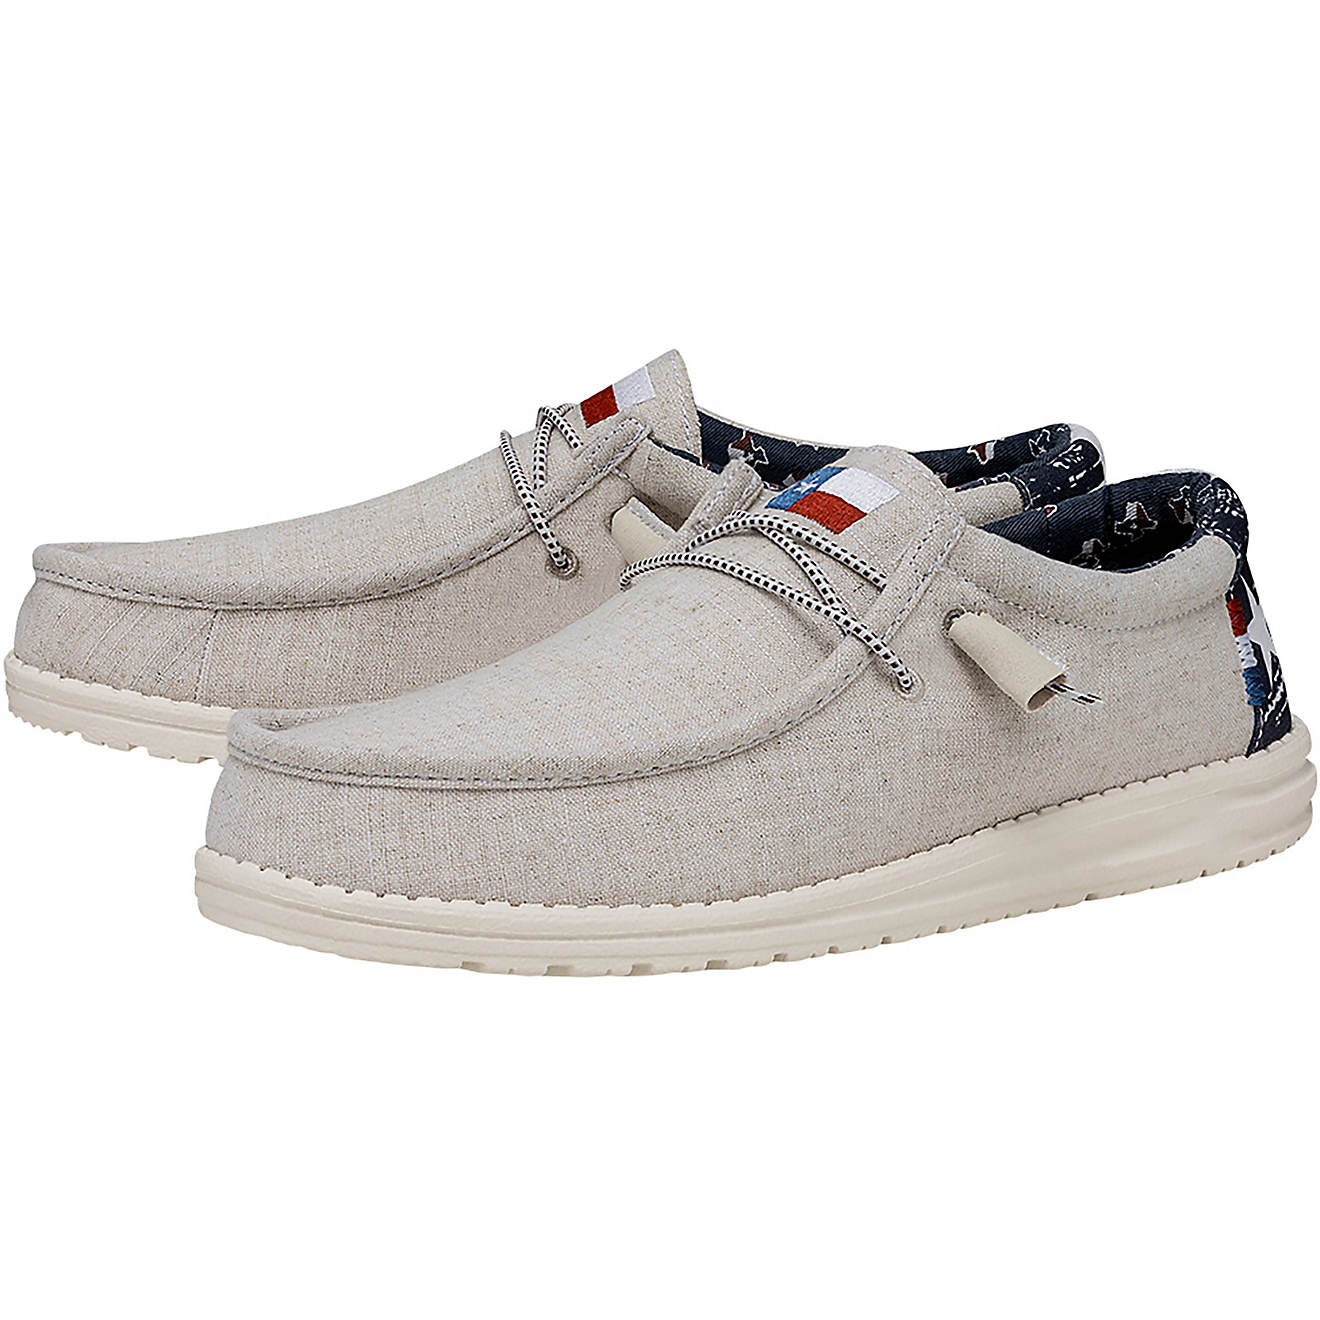 Wally Texas Canvas in Off White by Hey Dude Shoes